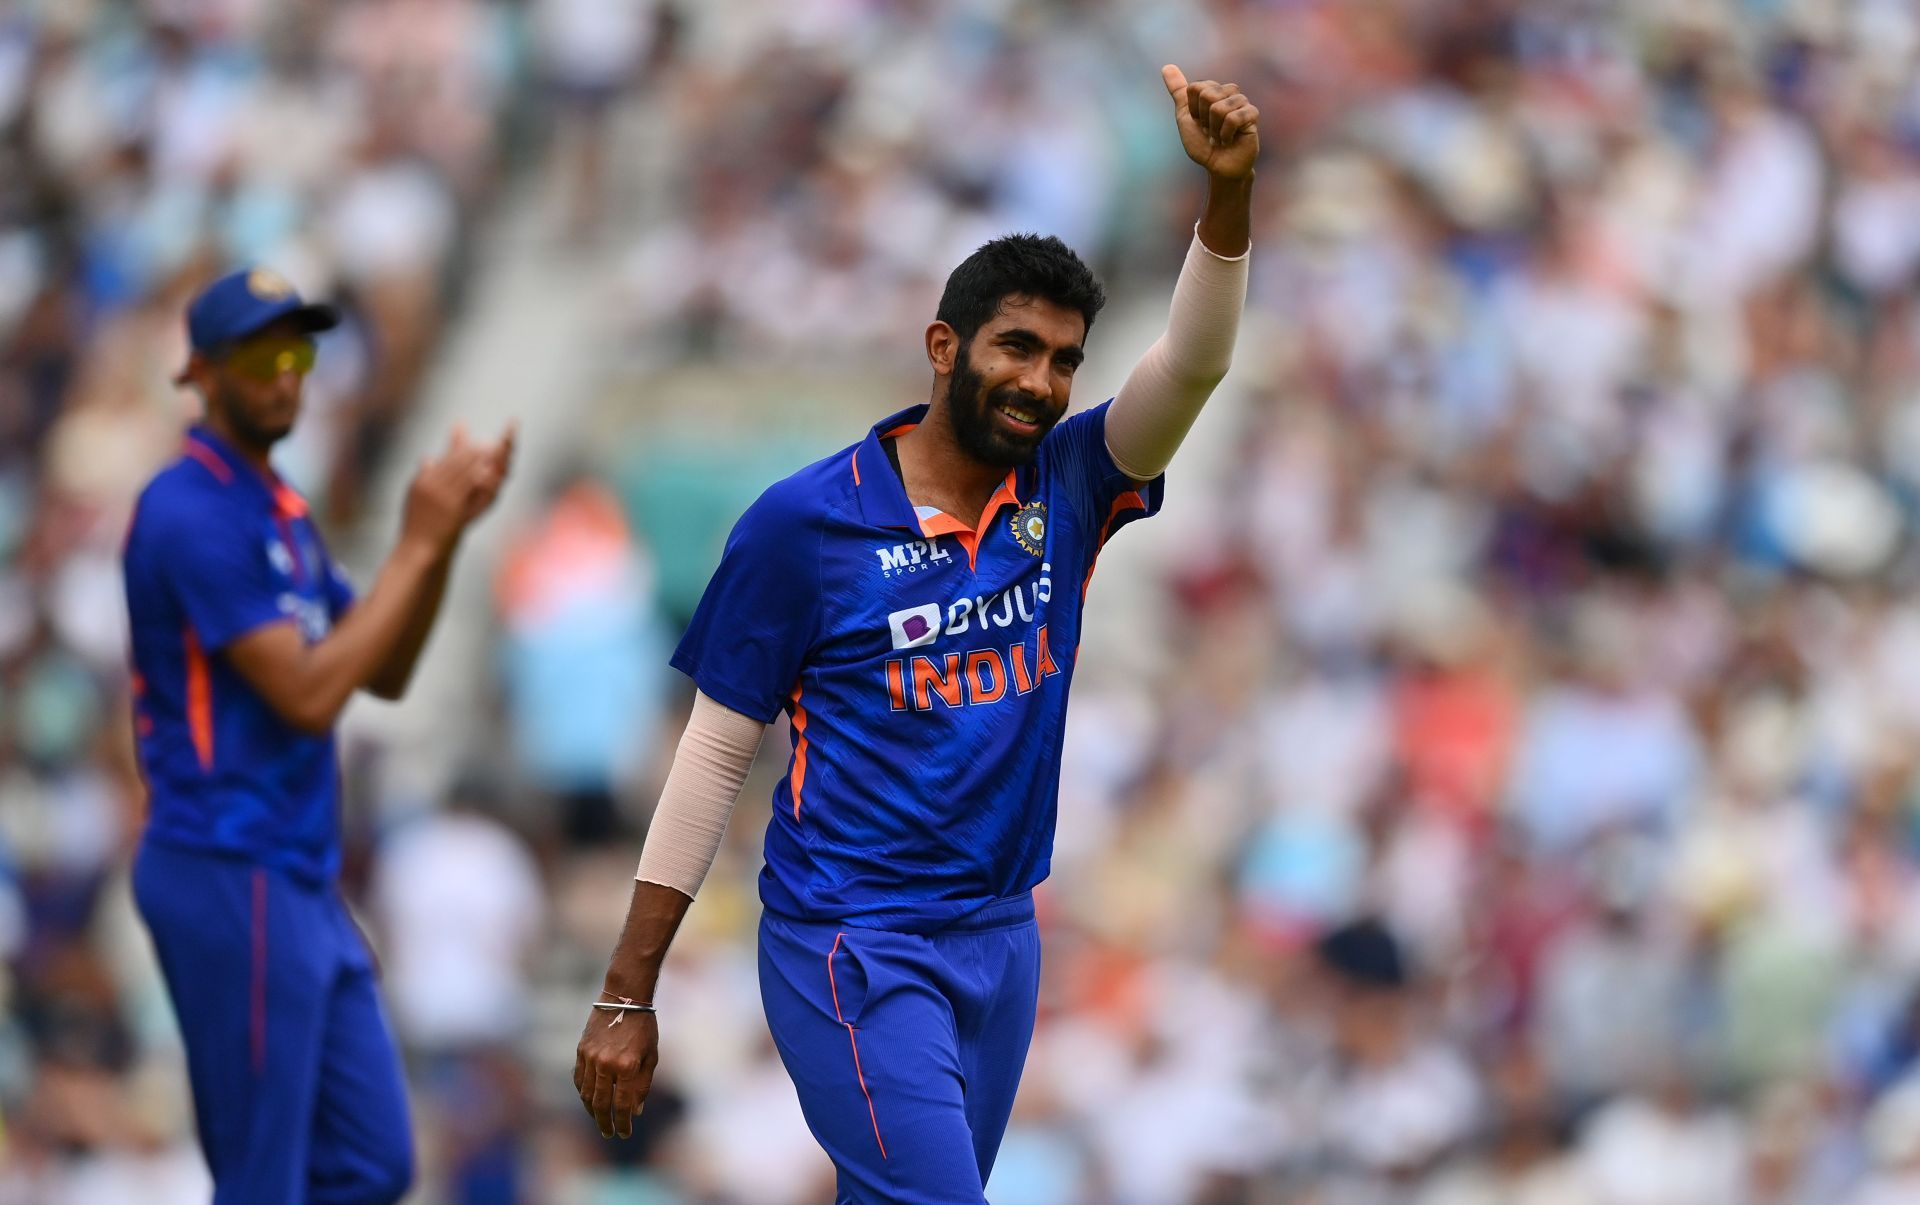 Jasprit Bumrah picked up six wickets in the first ODI at the Oval